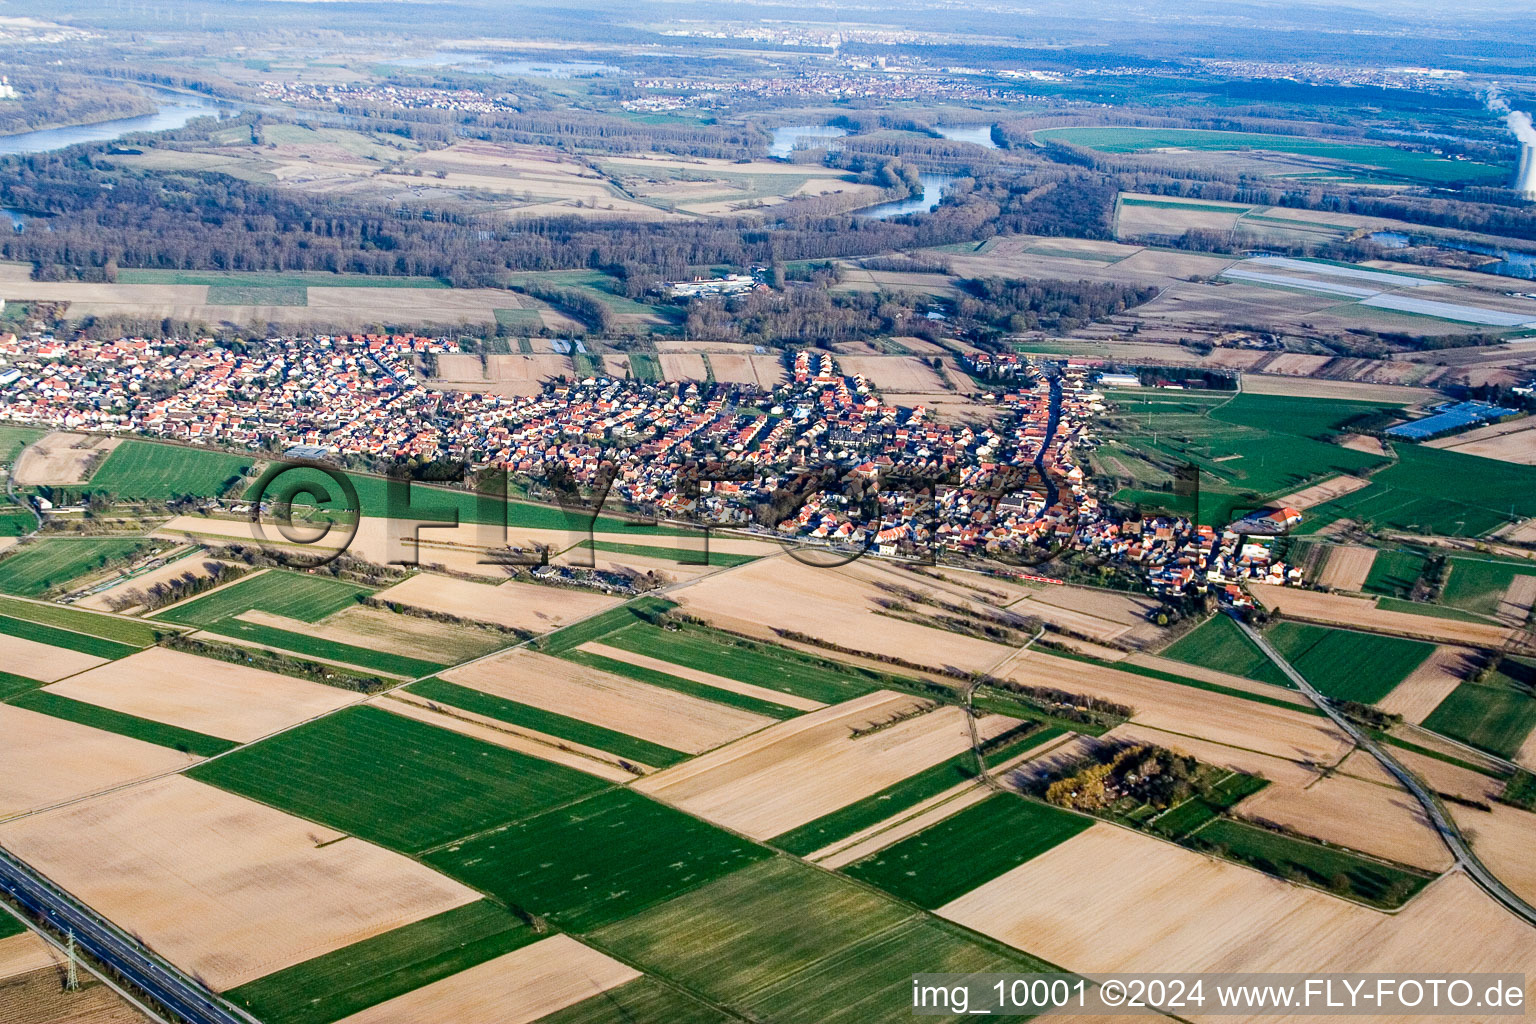 Village - view on the edge of agricultural fields and farmland in the district Heiligenstein in Roemerberg in the state Rhineland-Palatinate, Germany